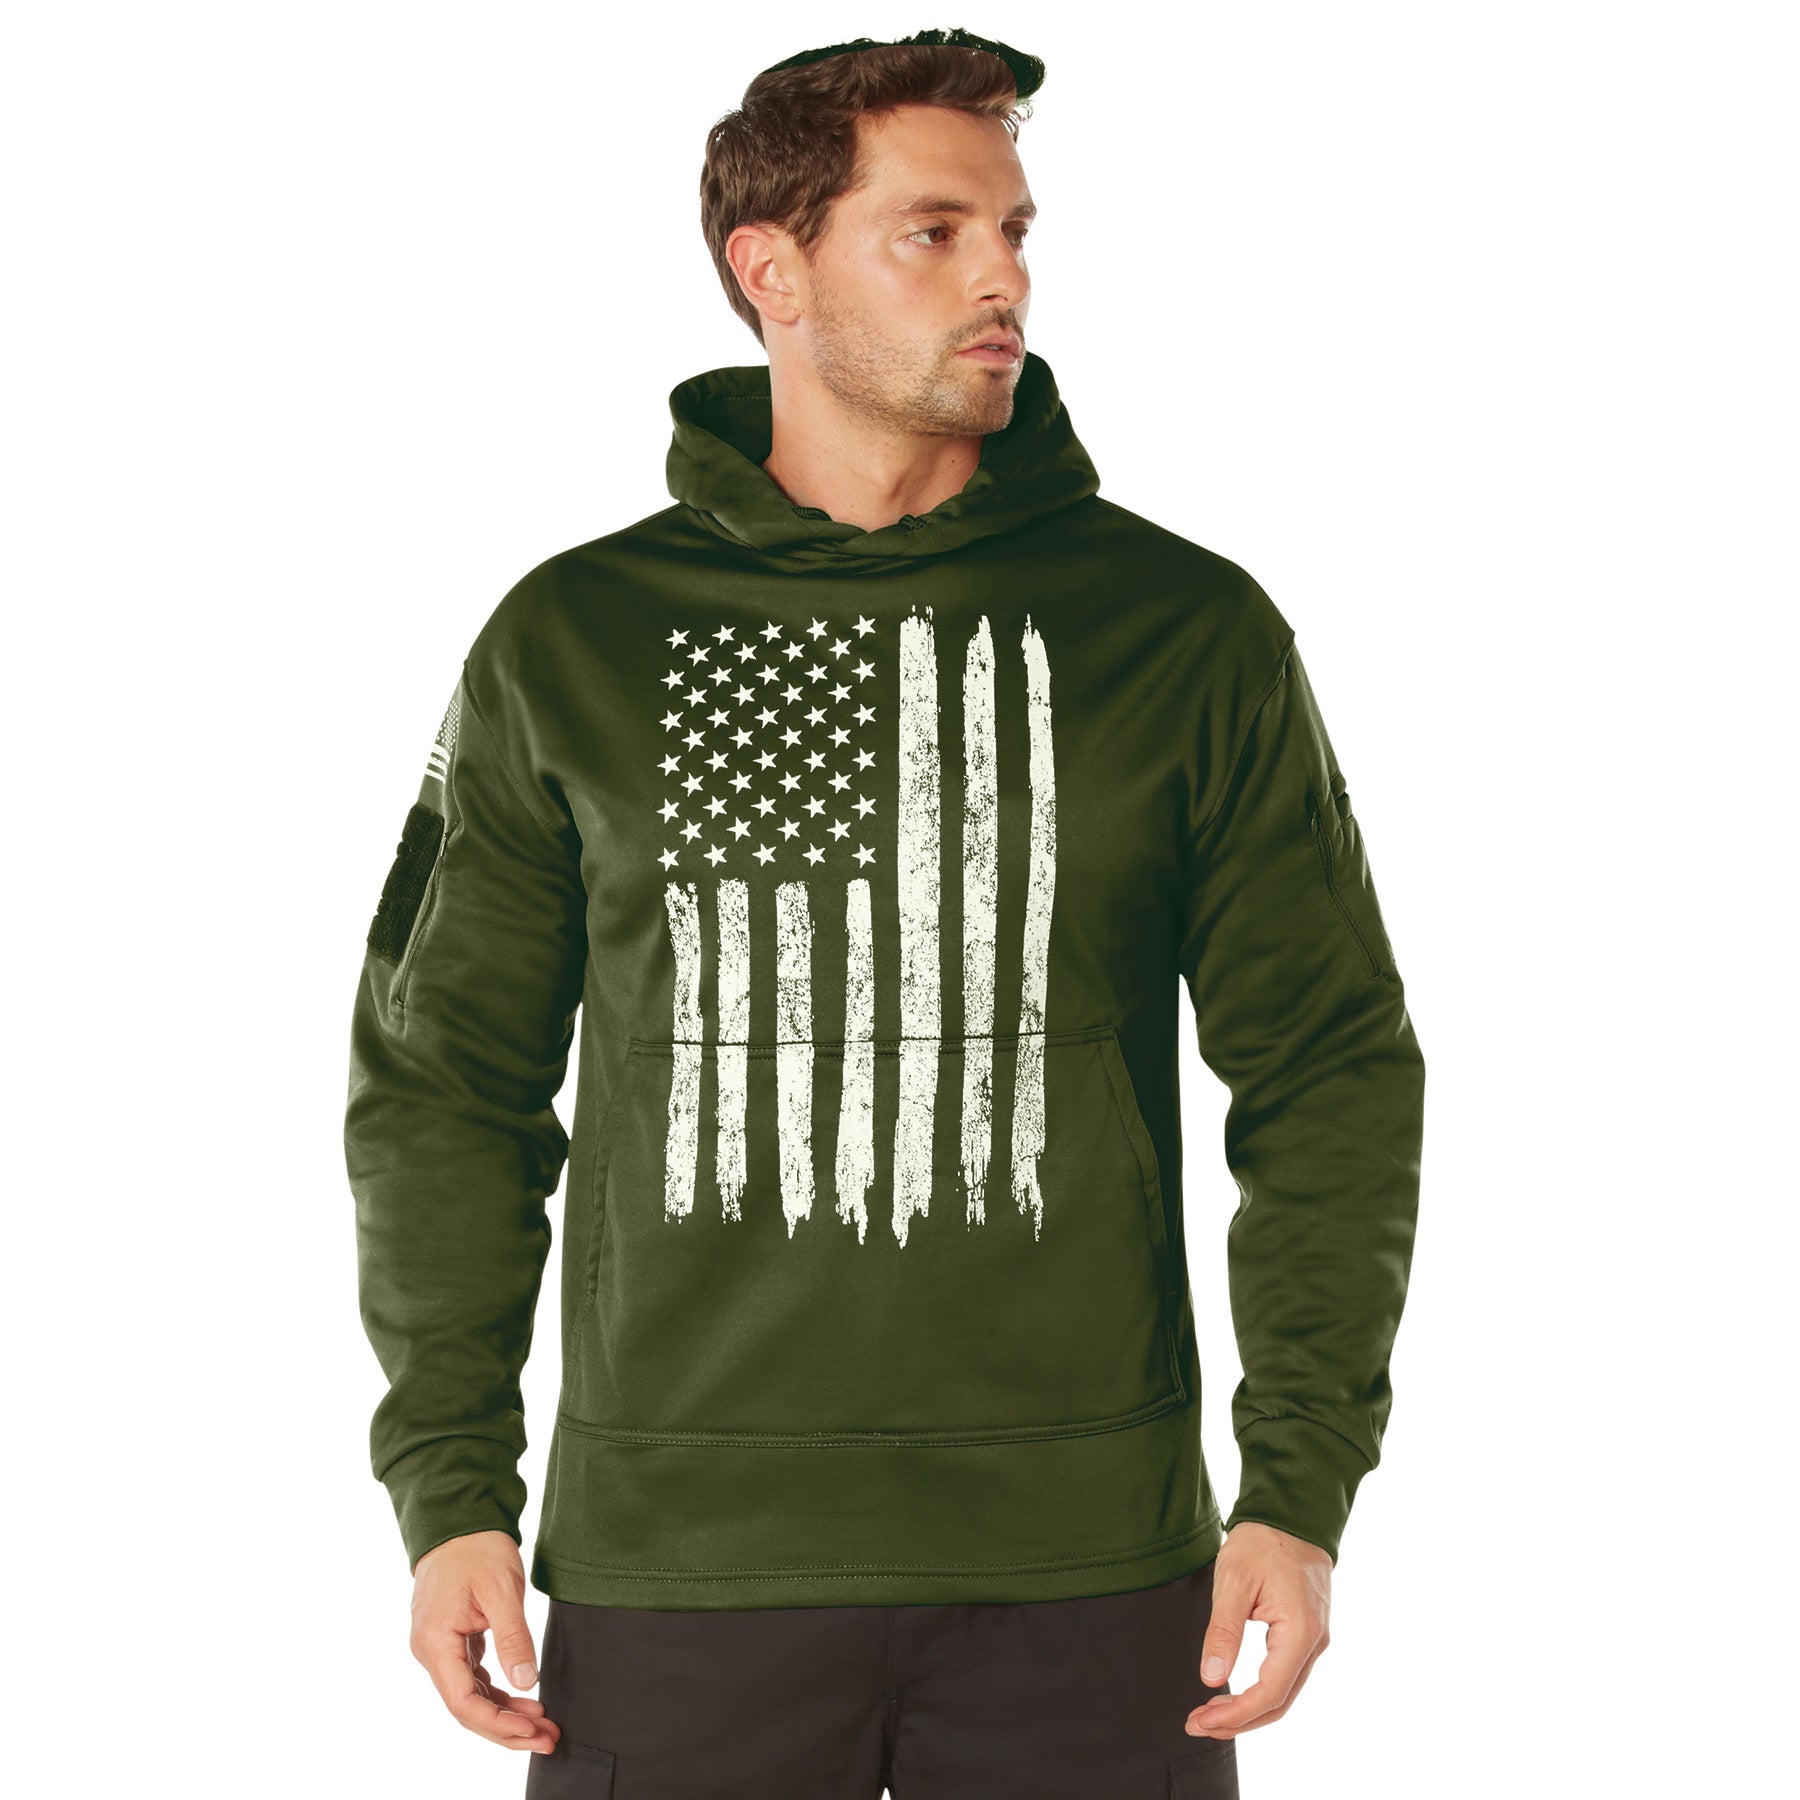 Poly US Flag Concealed Carry Hooded Sweatshirts Olive Drab